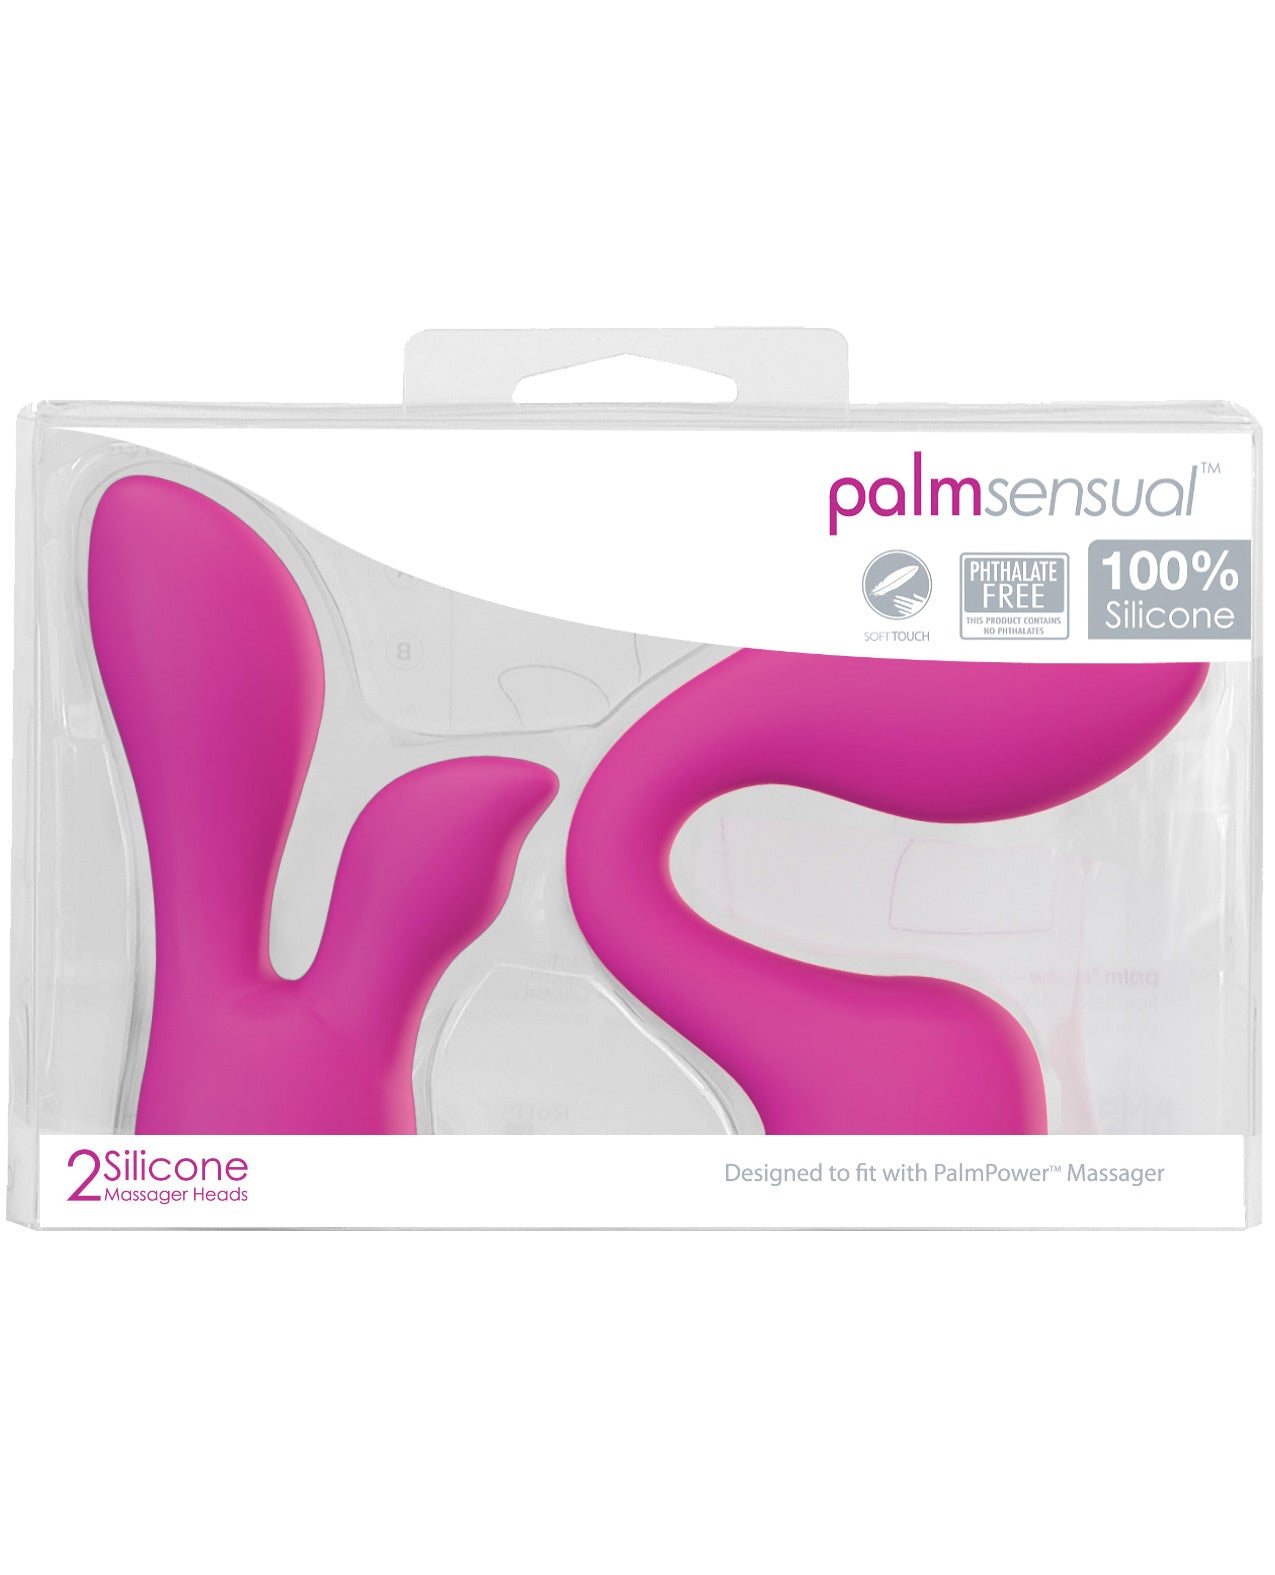 Palm Power Attachments - Palmsensual Pack Of 2 - LUST Depot